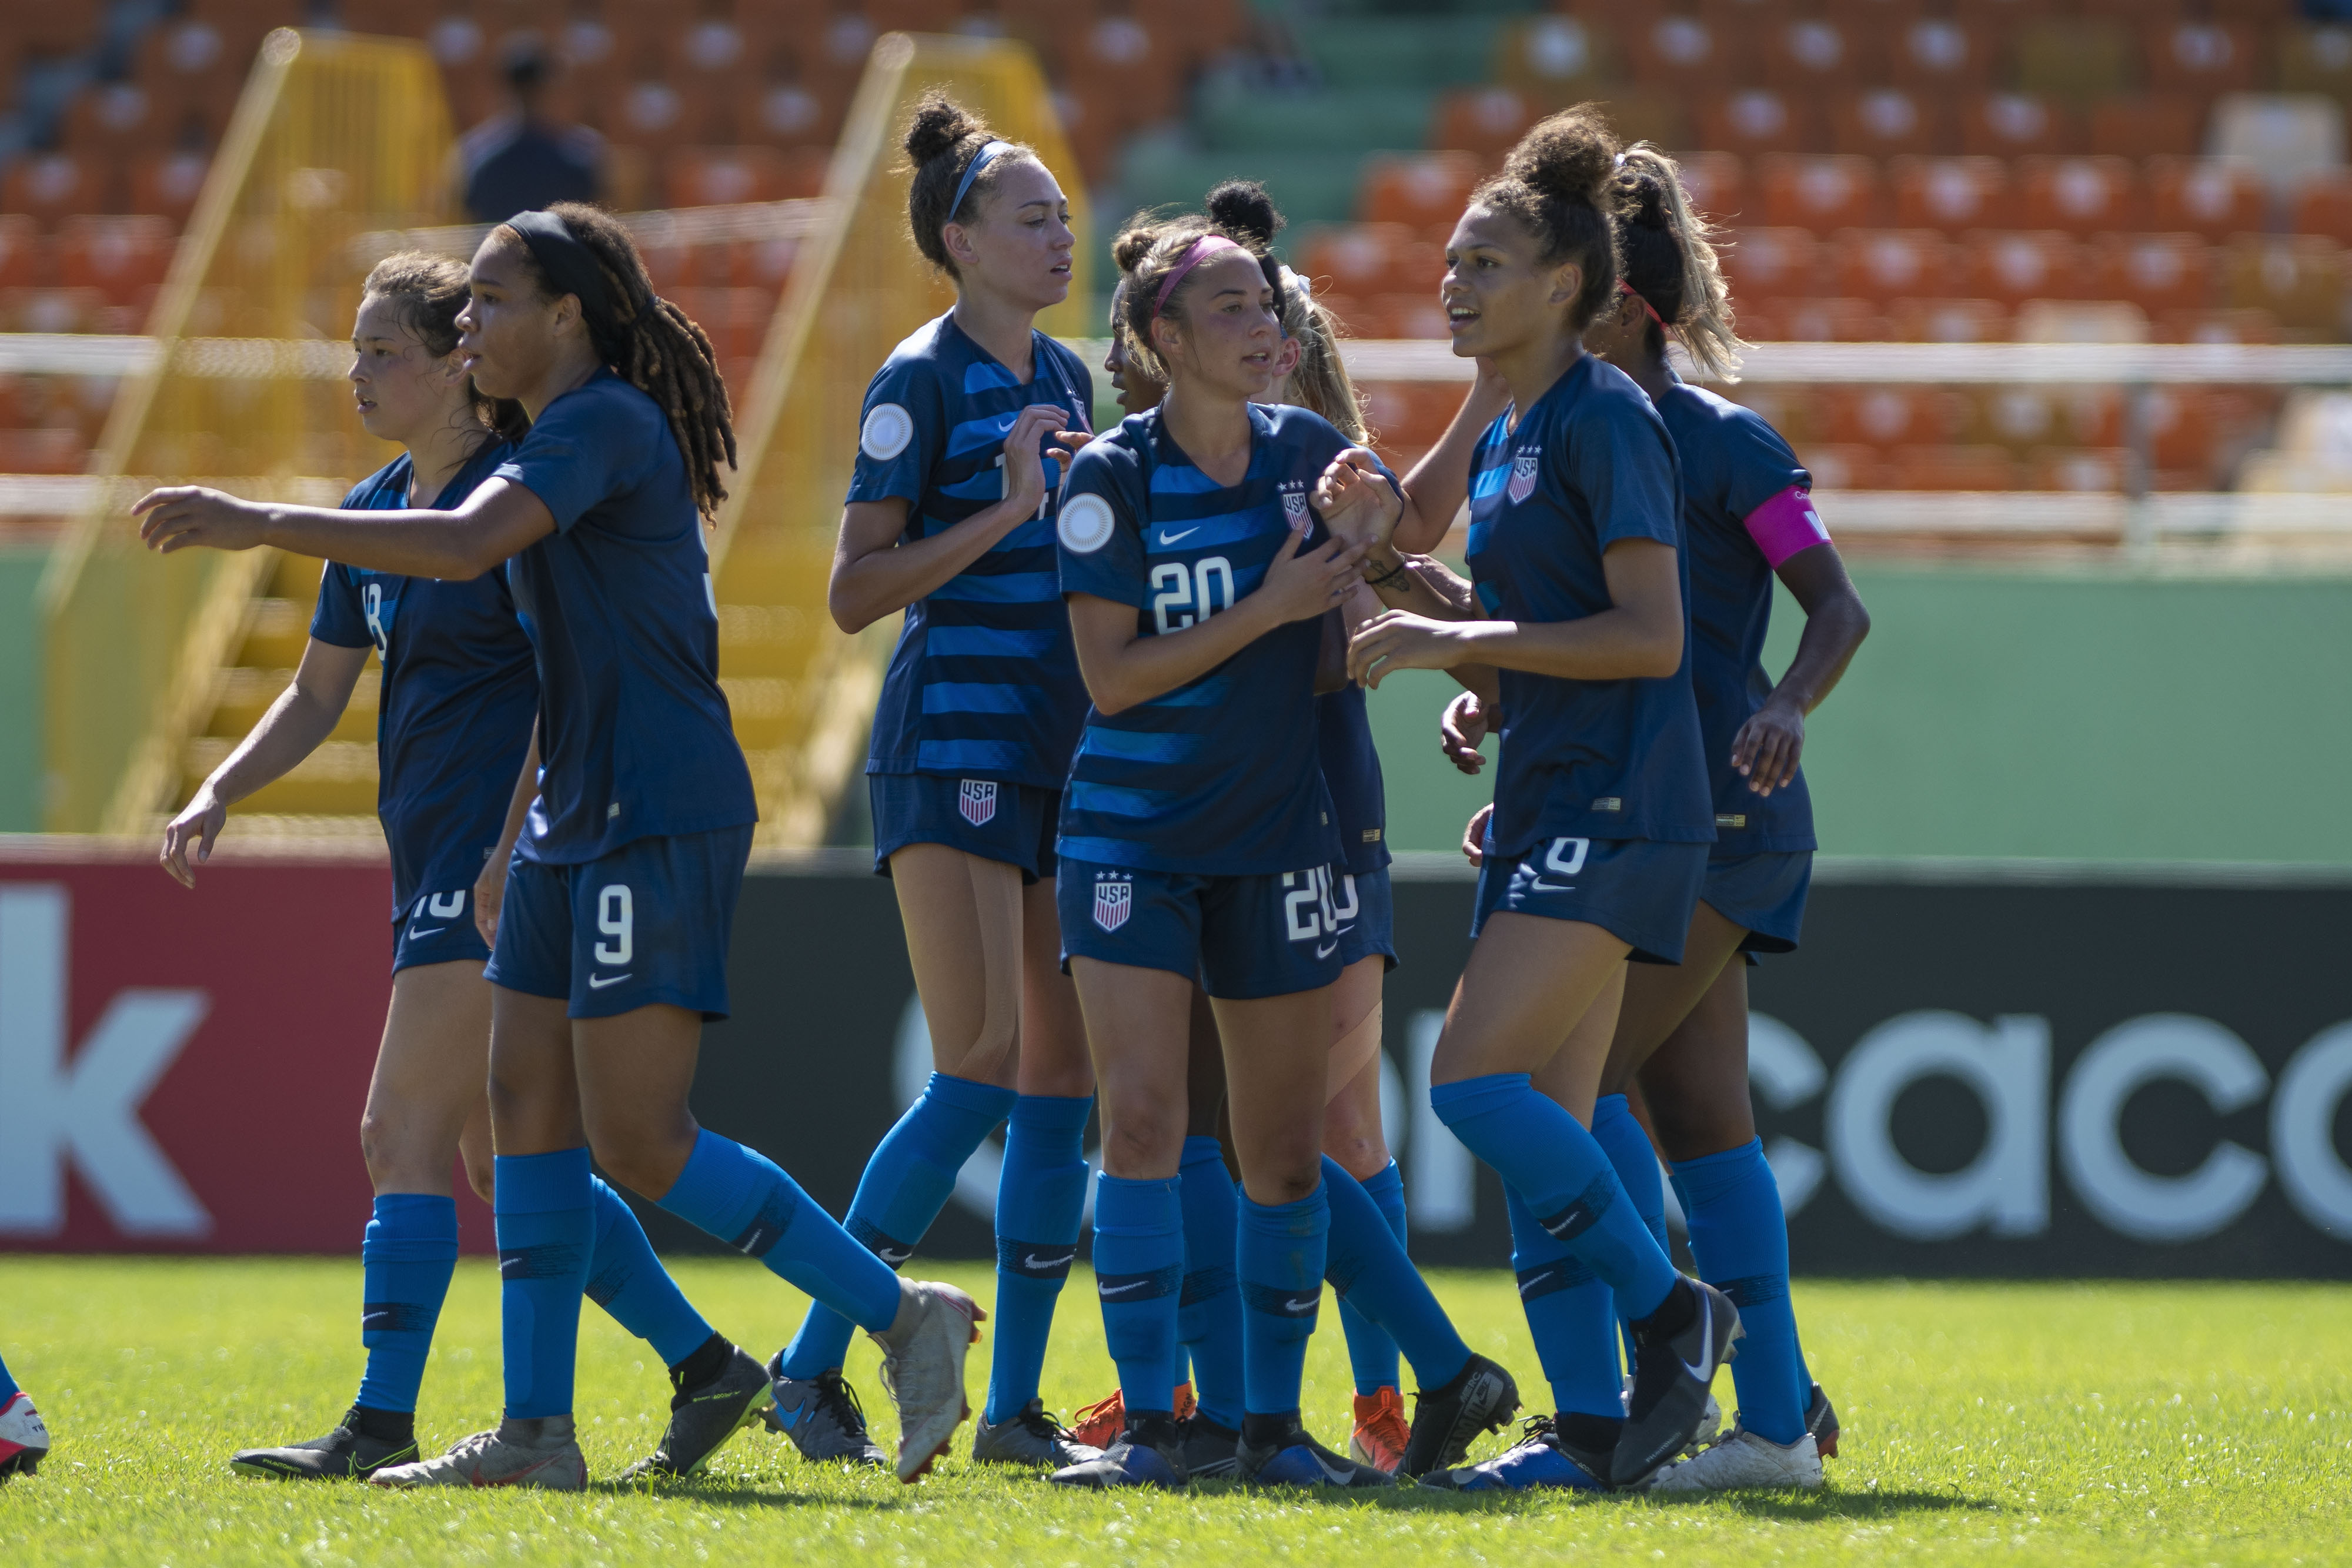 Mexico squareoff USA for Concacaf Women's U20 Championship title